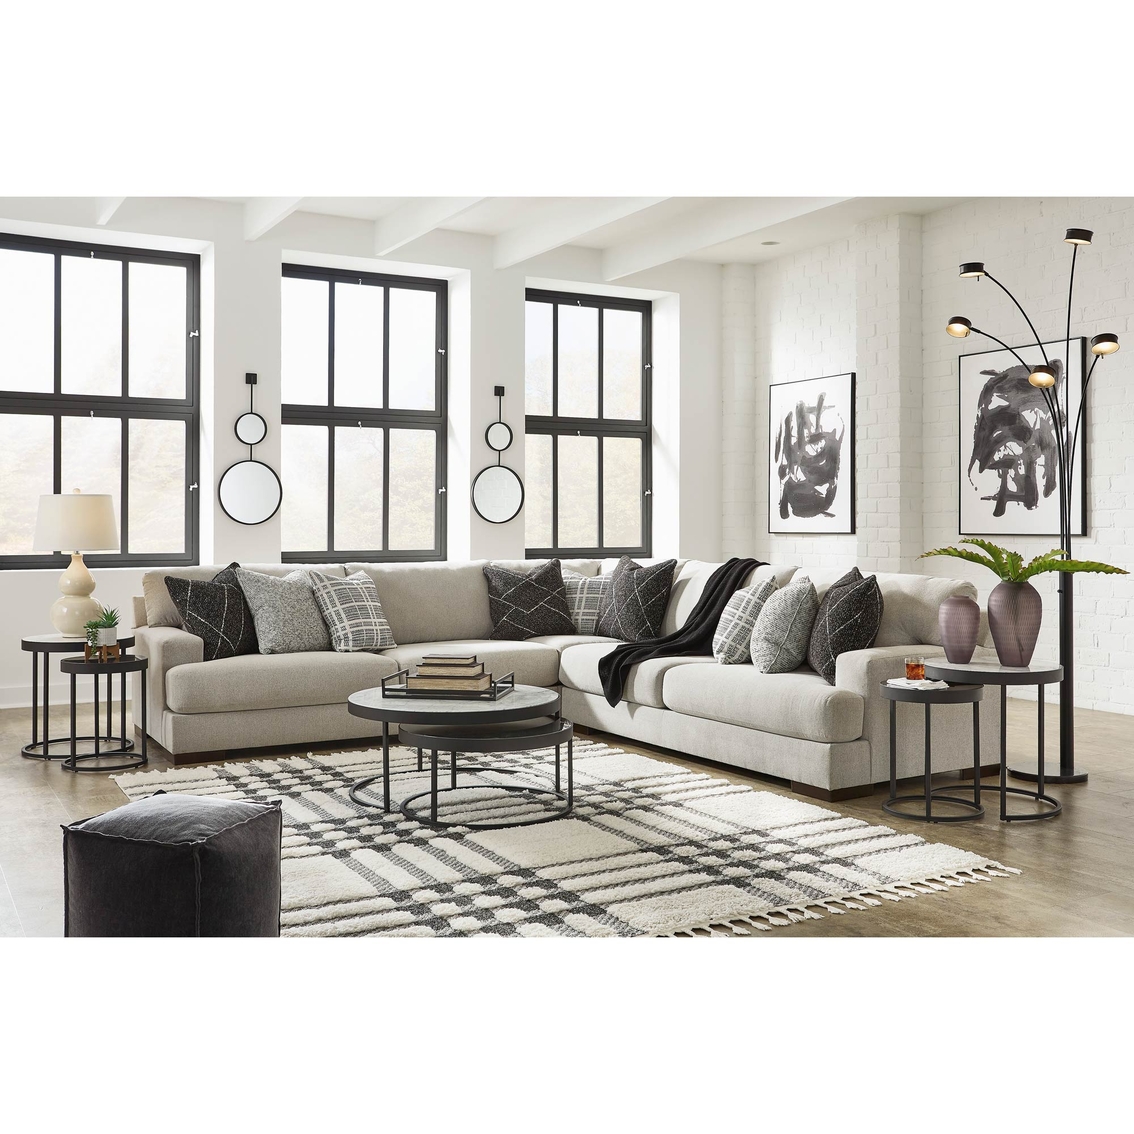 Benchcraft Artsie 3 Pc. Sectional | Sofas & Couches | Furniture ...